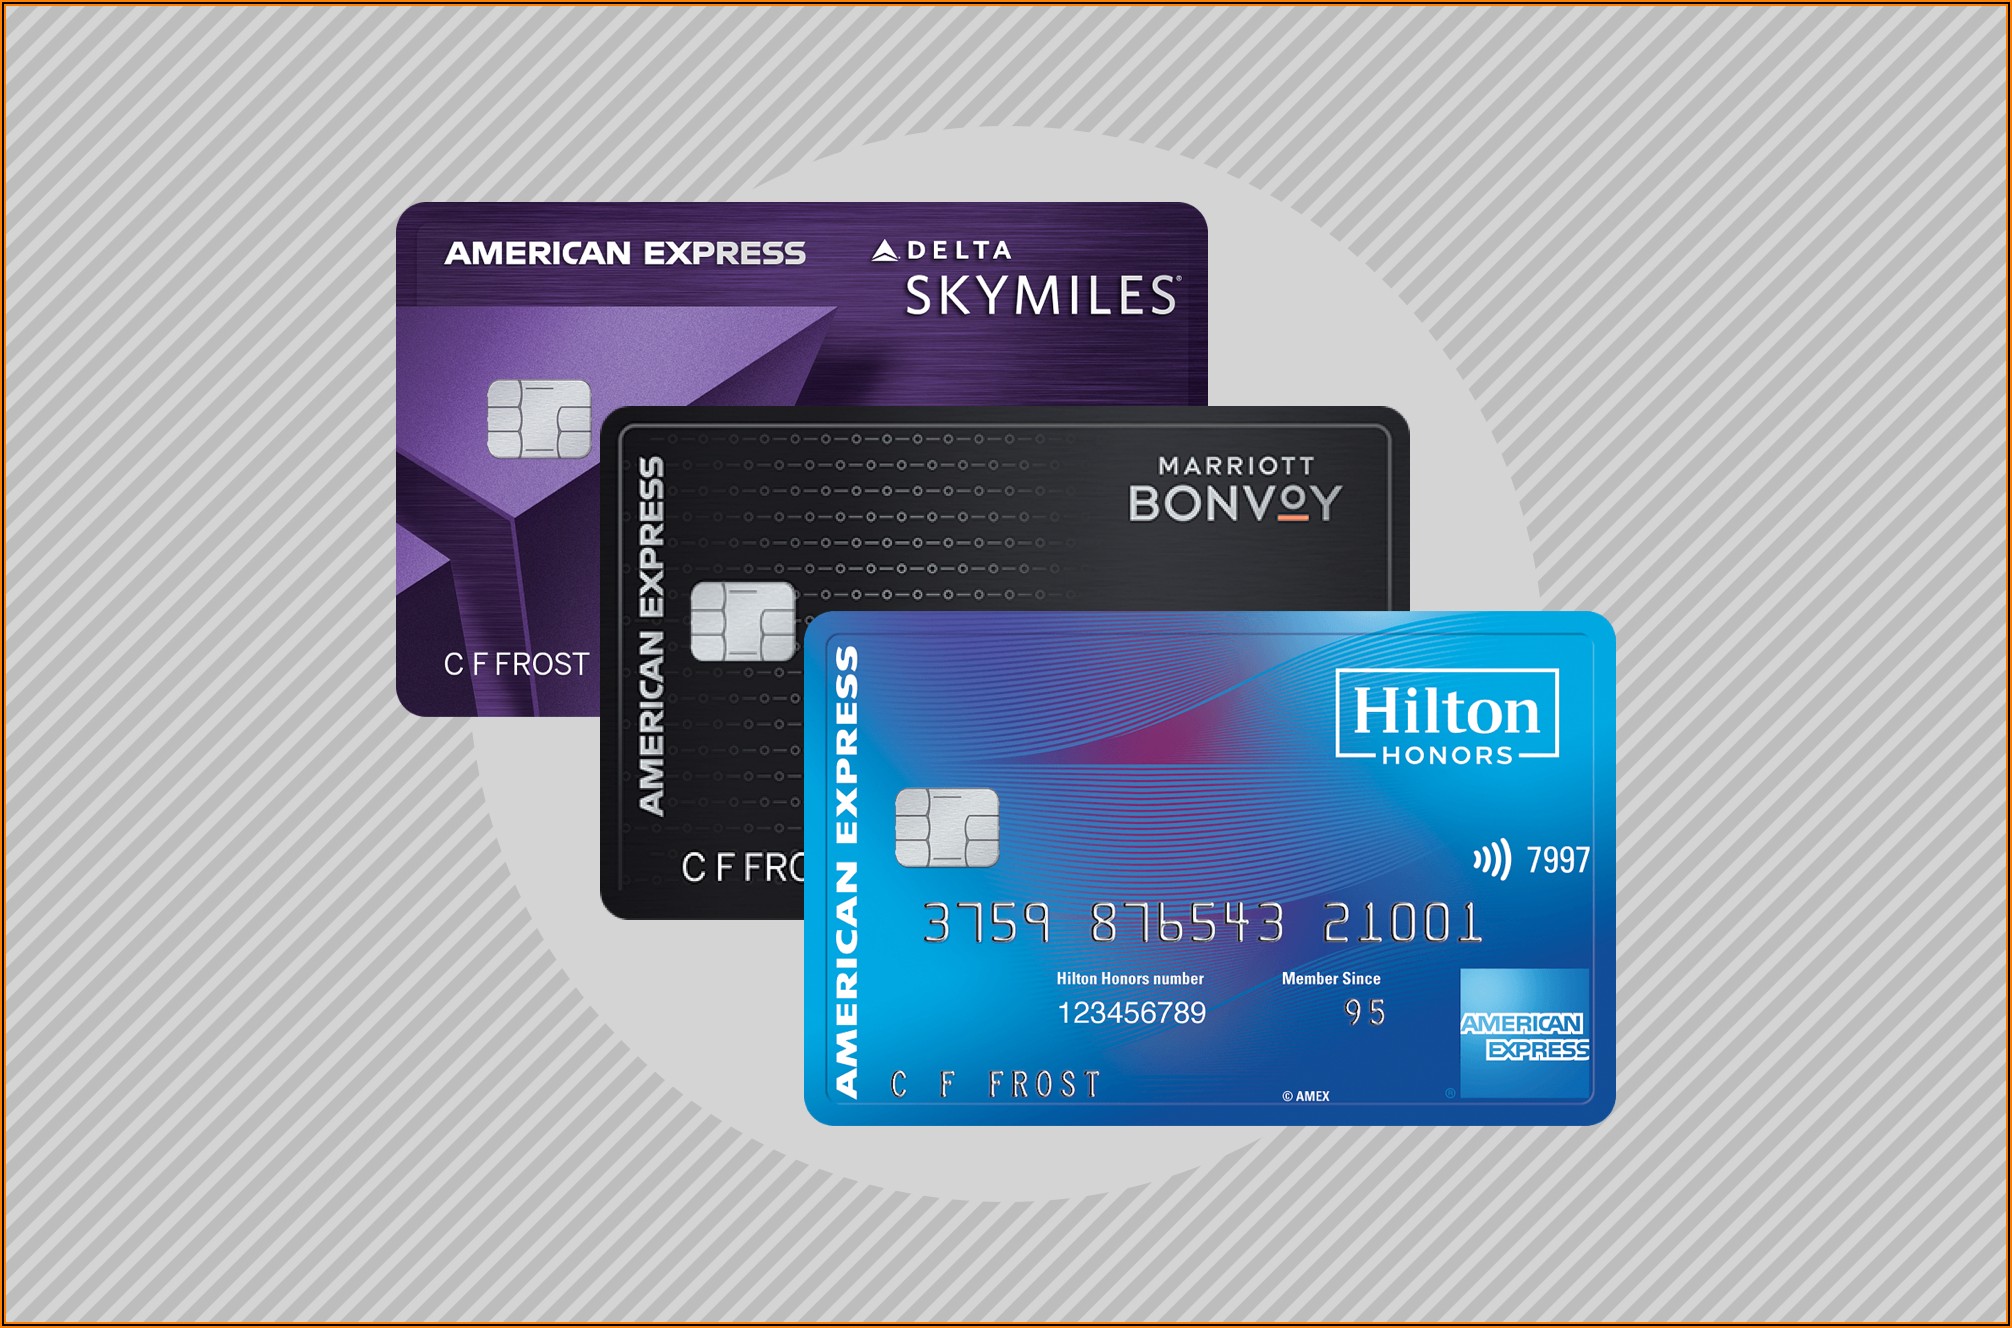 Amex Corporate Card Benefits Lounge Access